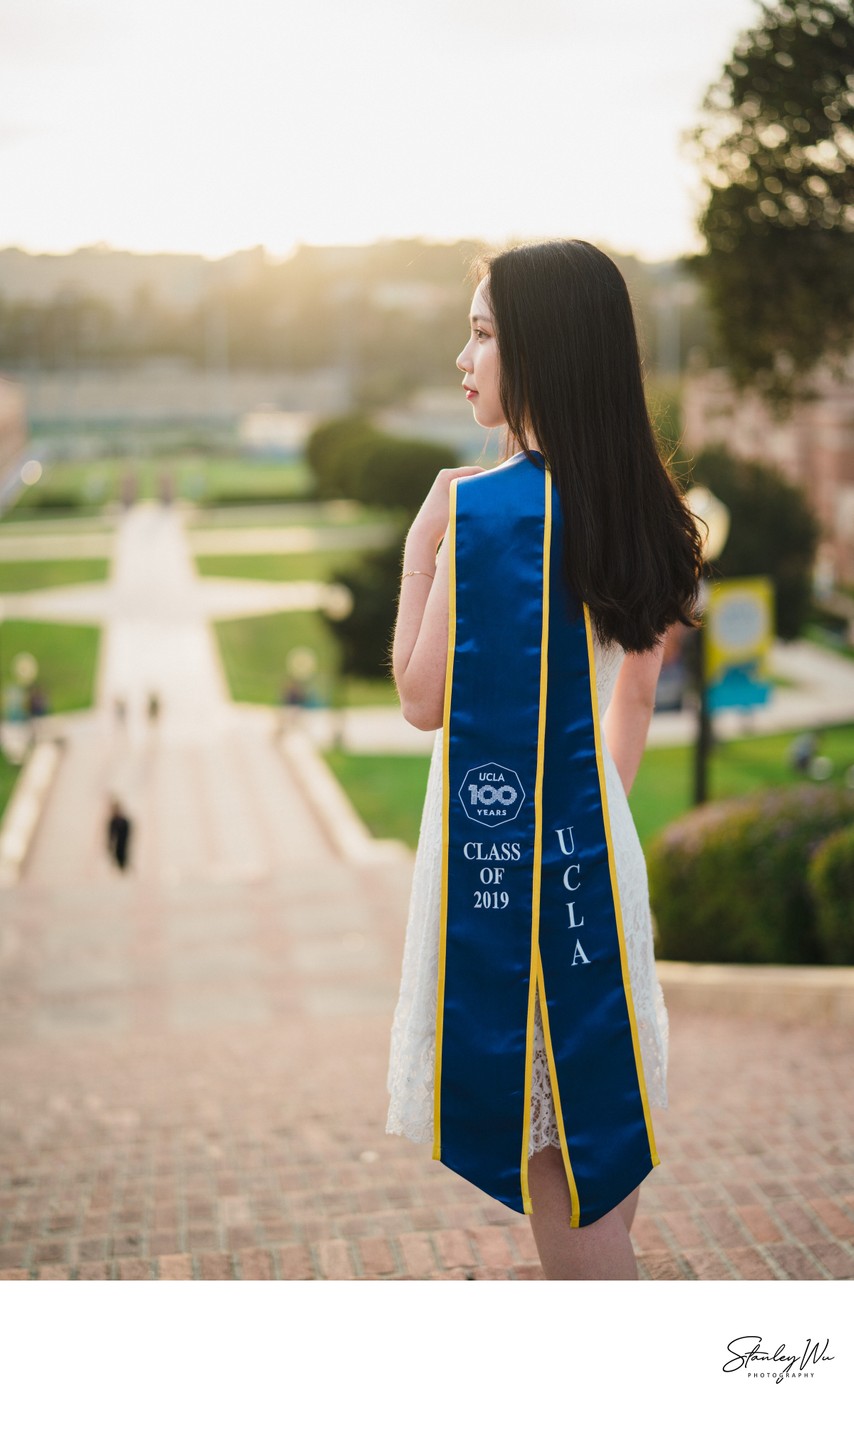 Iconic Sash Over The Shoulder Pose for Grad Photos